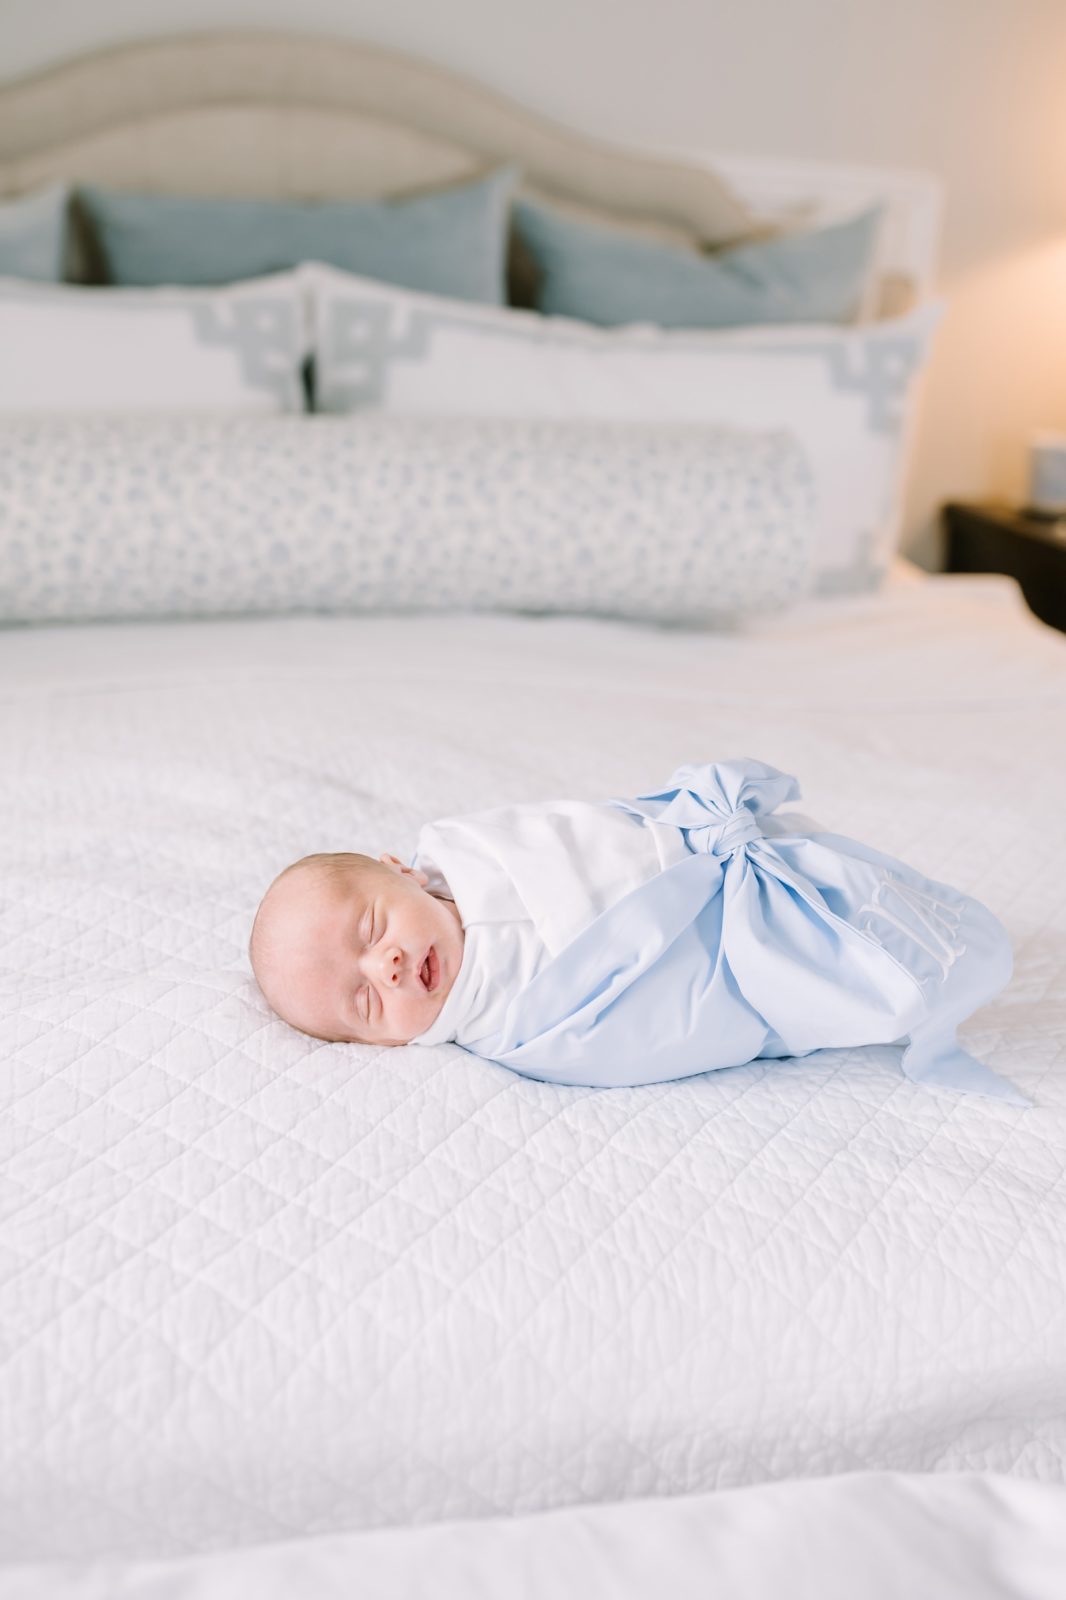 Baby boy swaddled in a blue bow on a bed by Christina Elliott Photography in Houston, Texas. Houston newborn blue bow baby swaddle #ChristinaElliottPhotography #ChristinaElliottNewborns #HoustonLifestyleNewborns #HoustonFamilyPhotographer